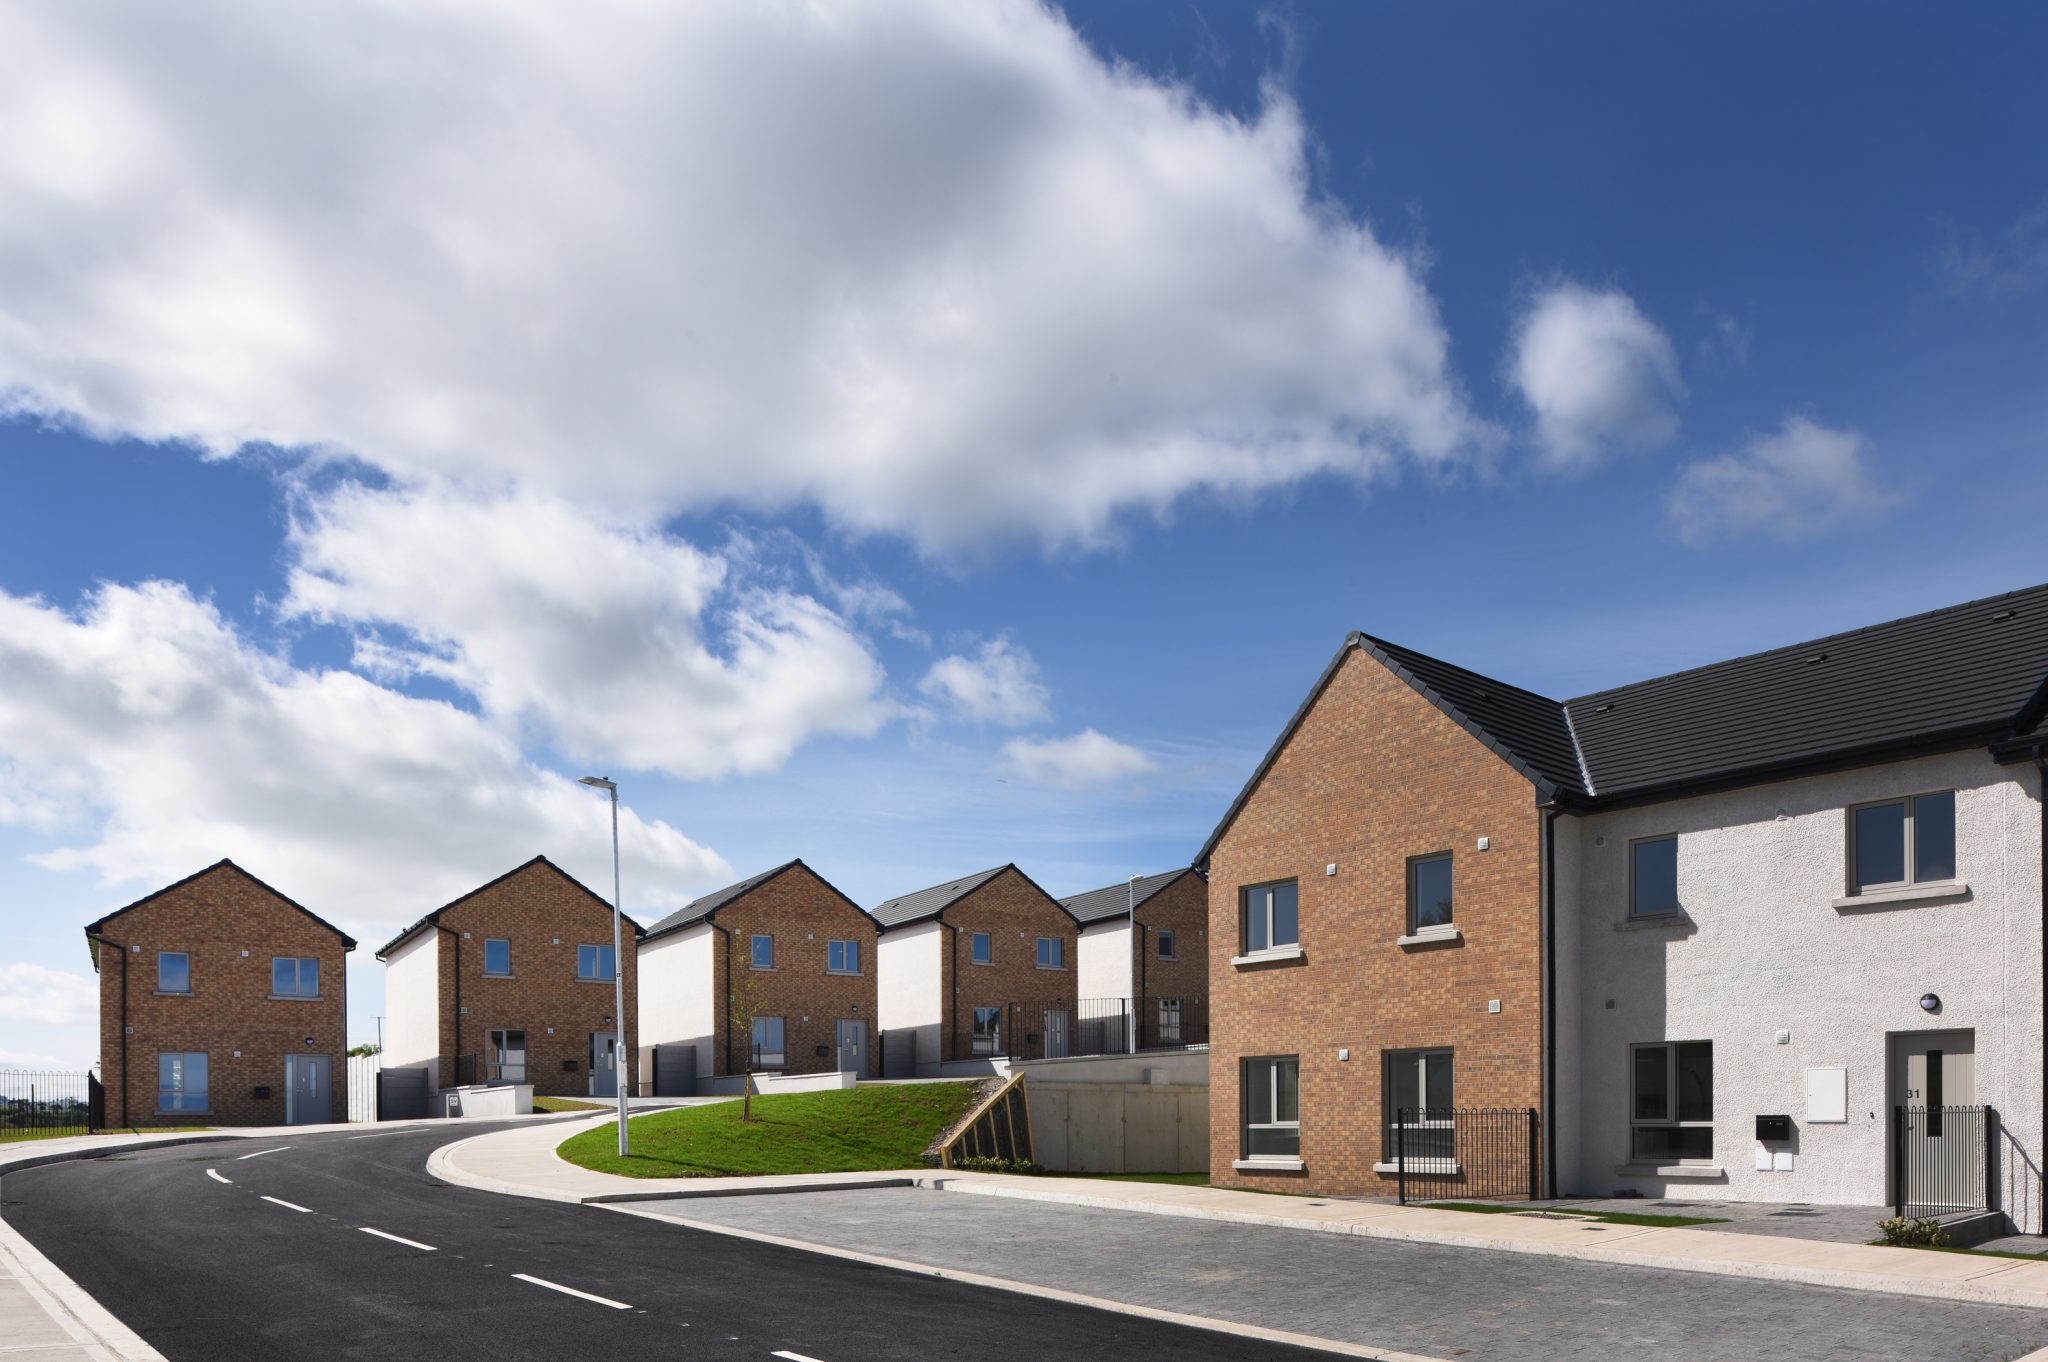 Successful completion of residential development at Ashtown Lane, Wicklow